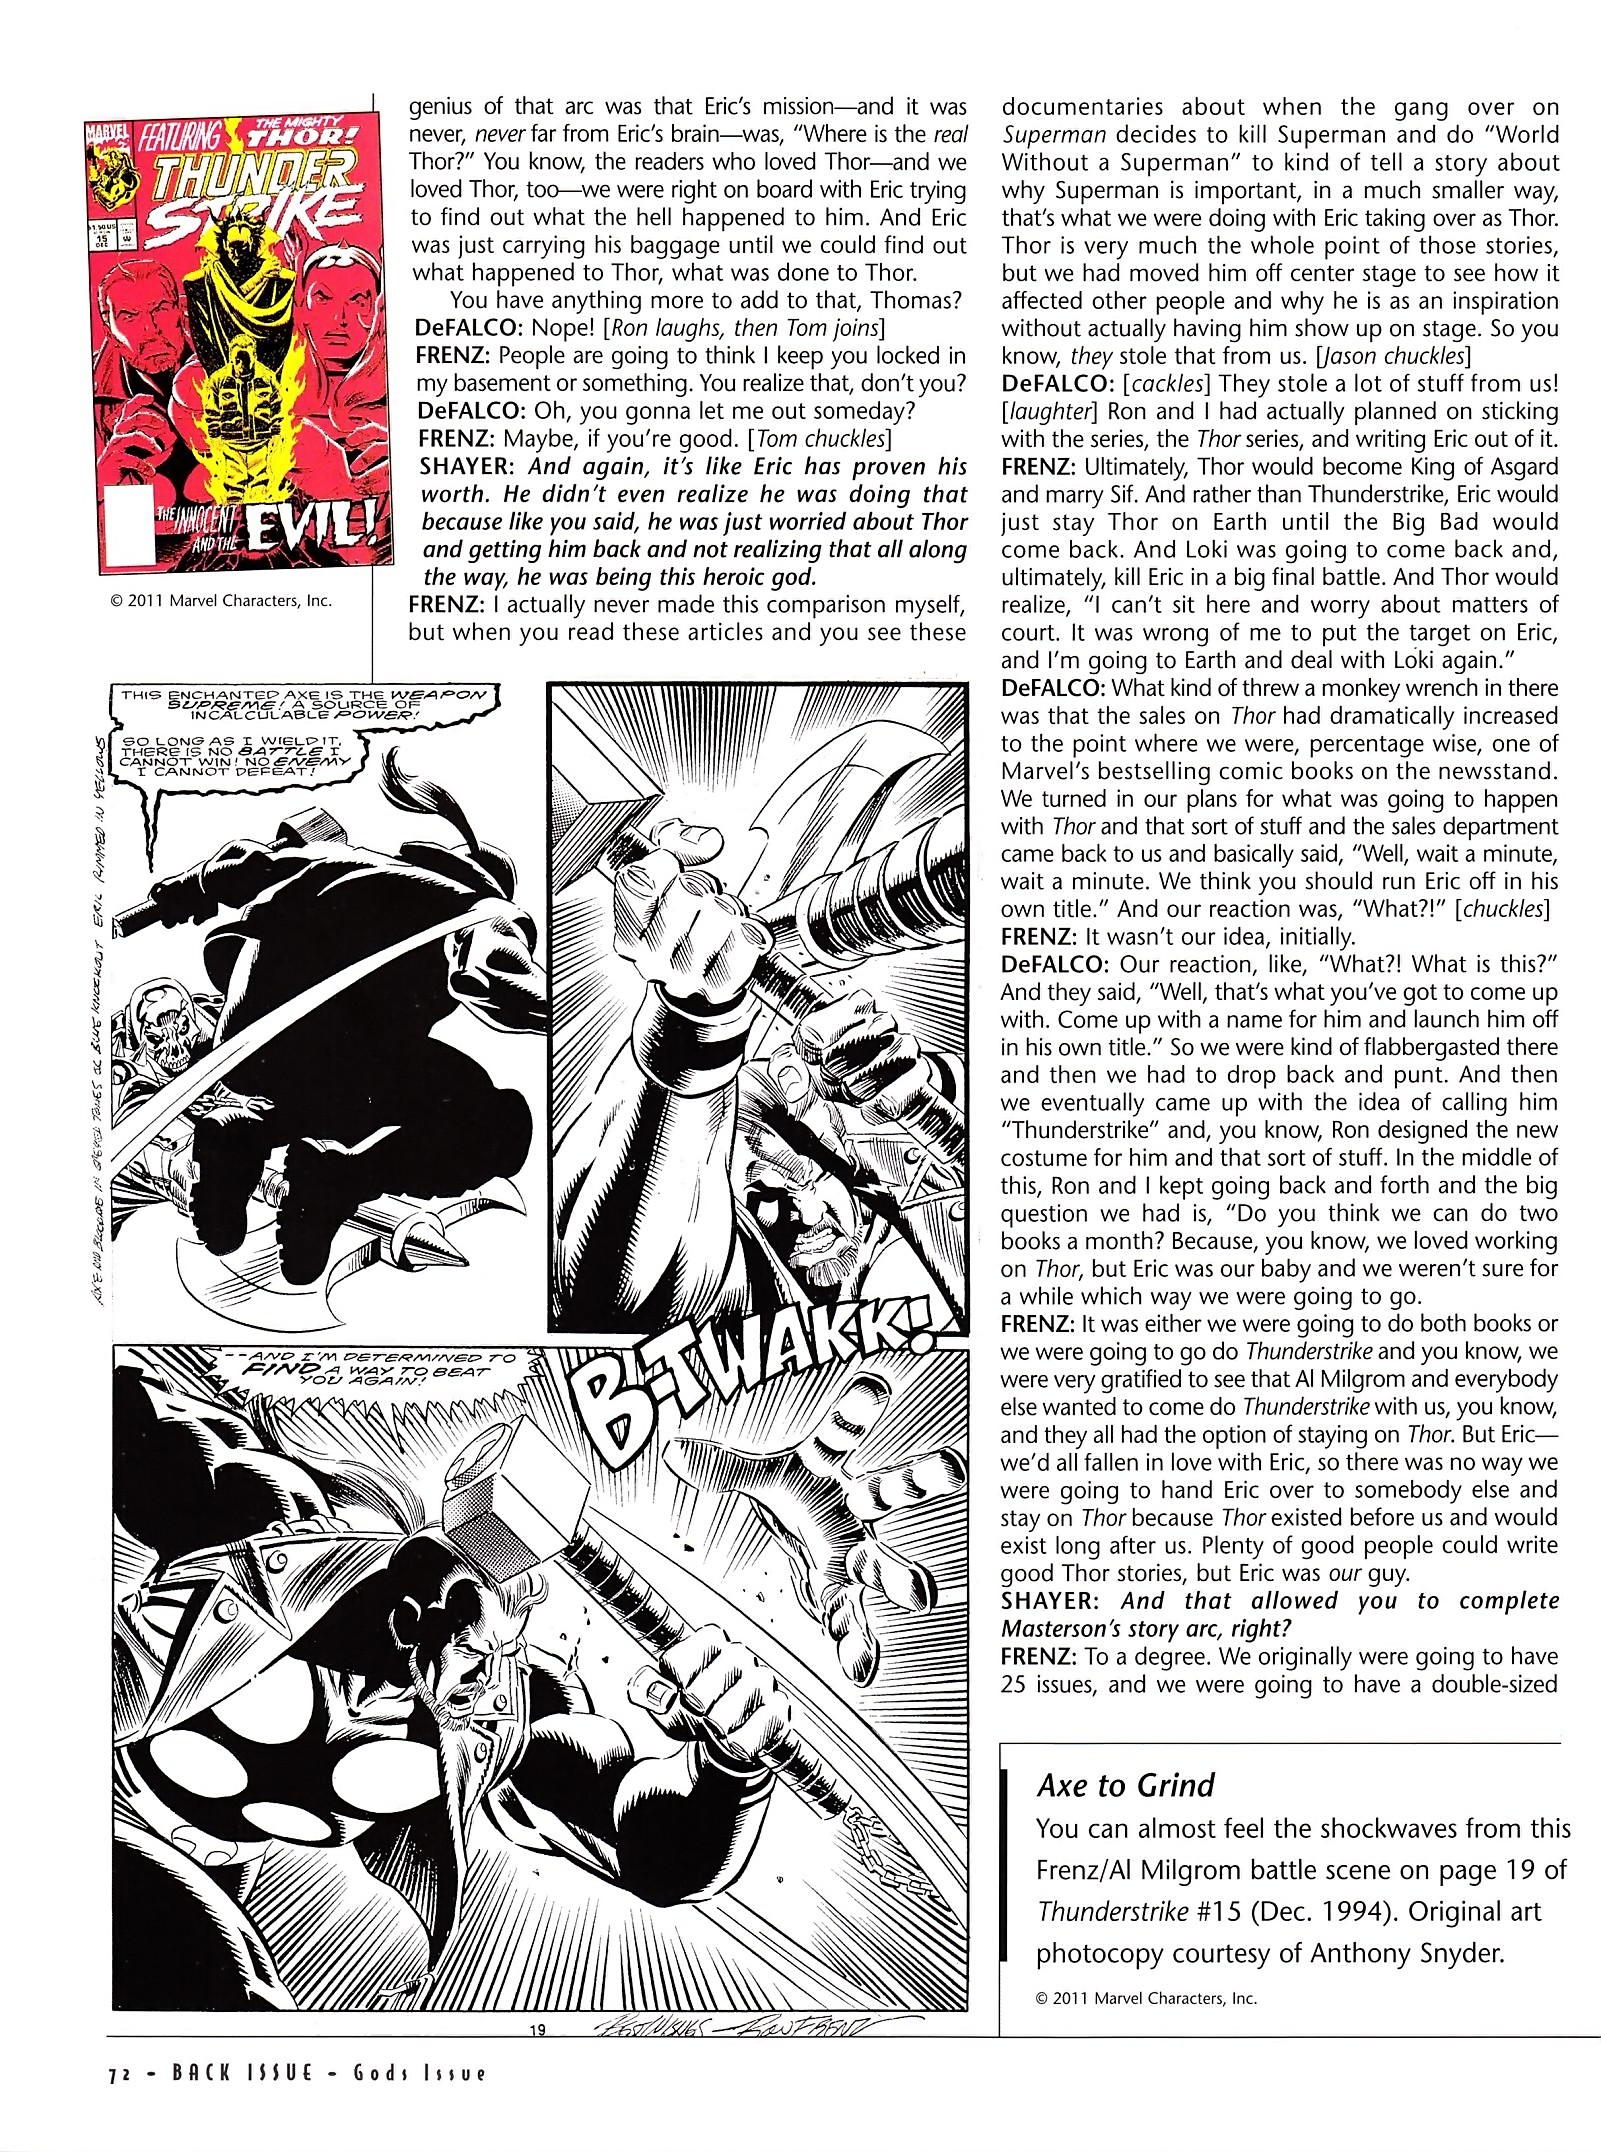 Read online Back Issue comic -  Issue #53 - 73